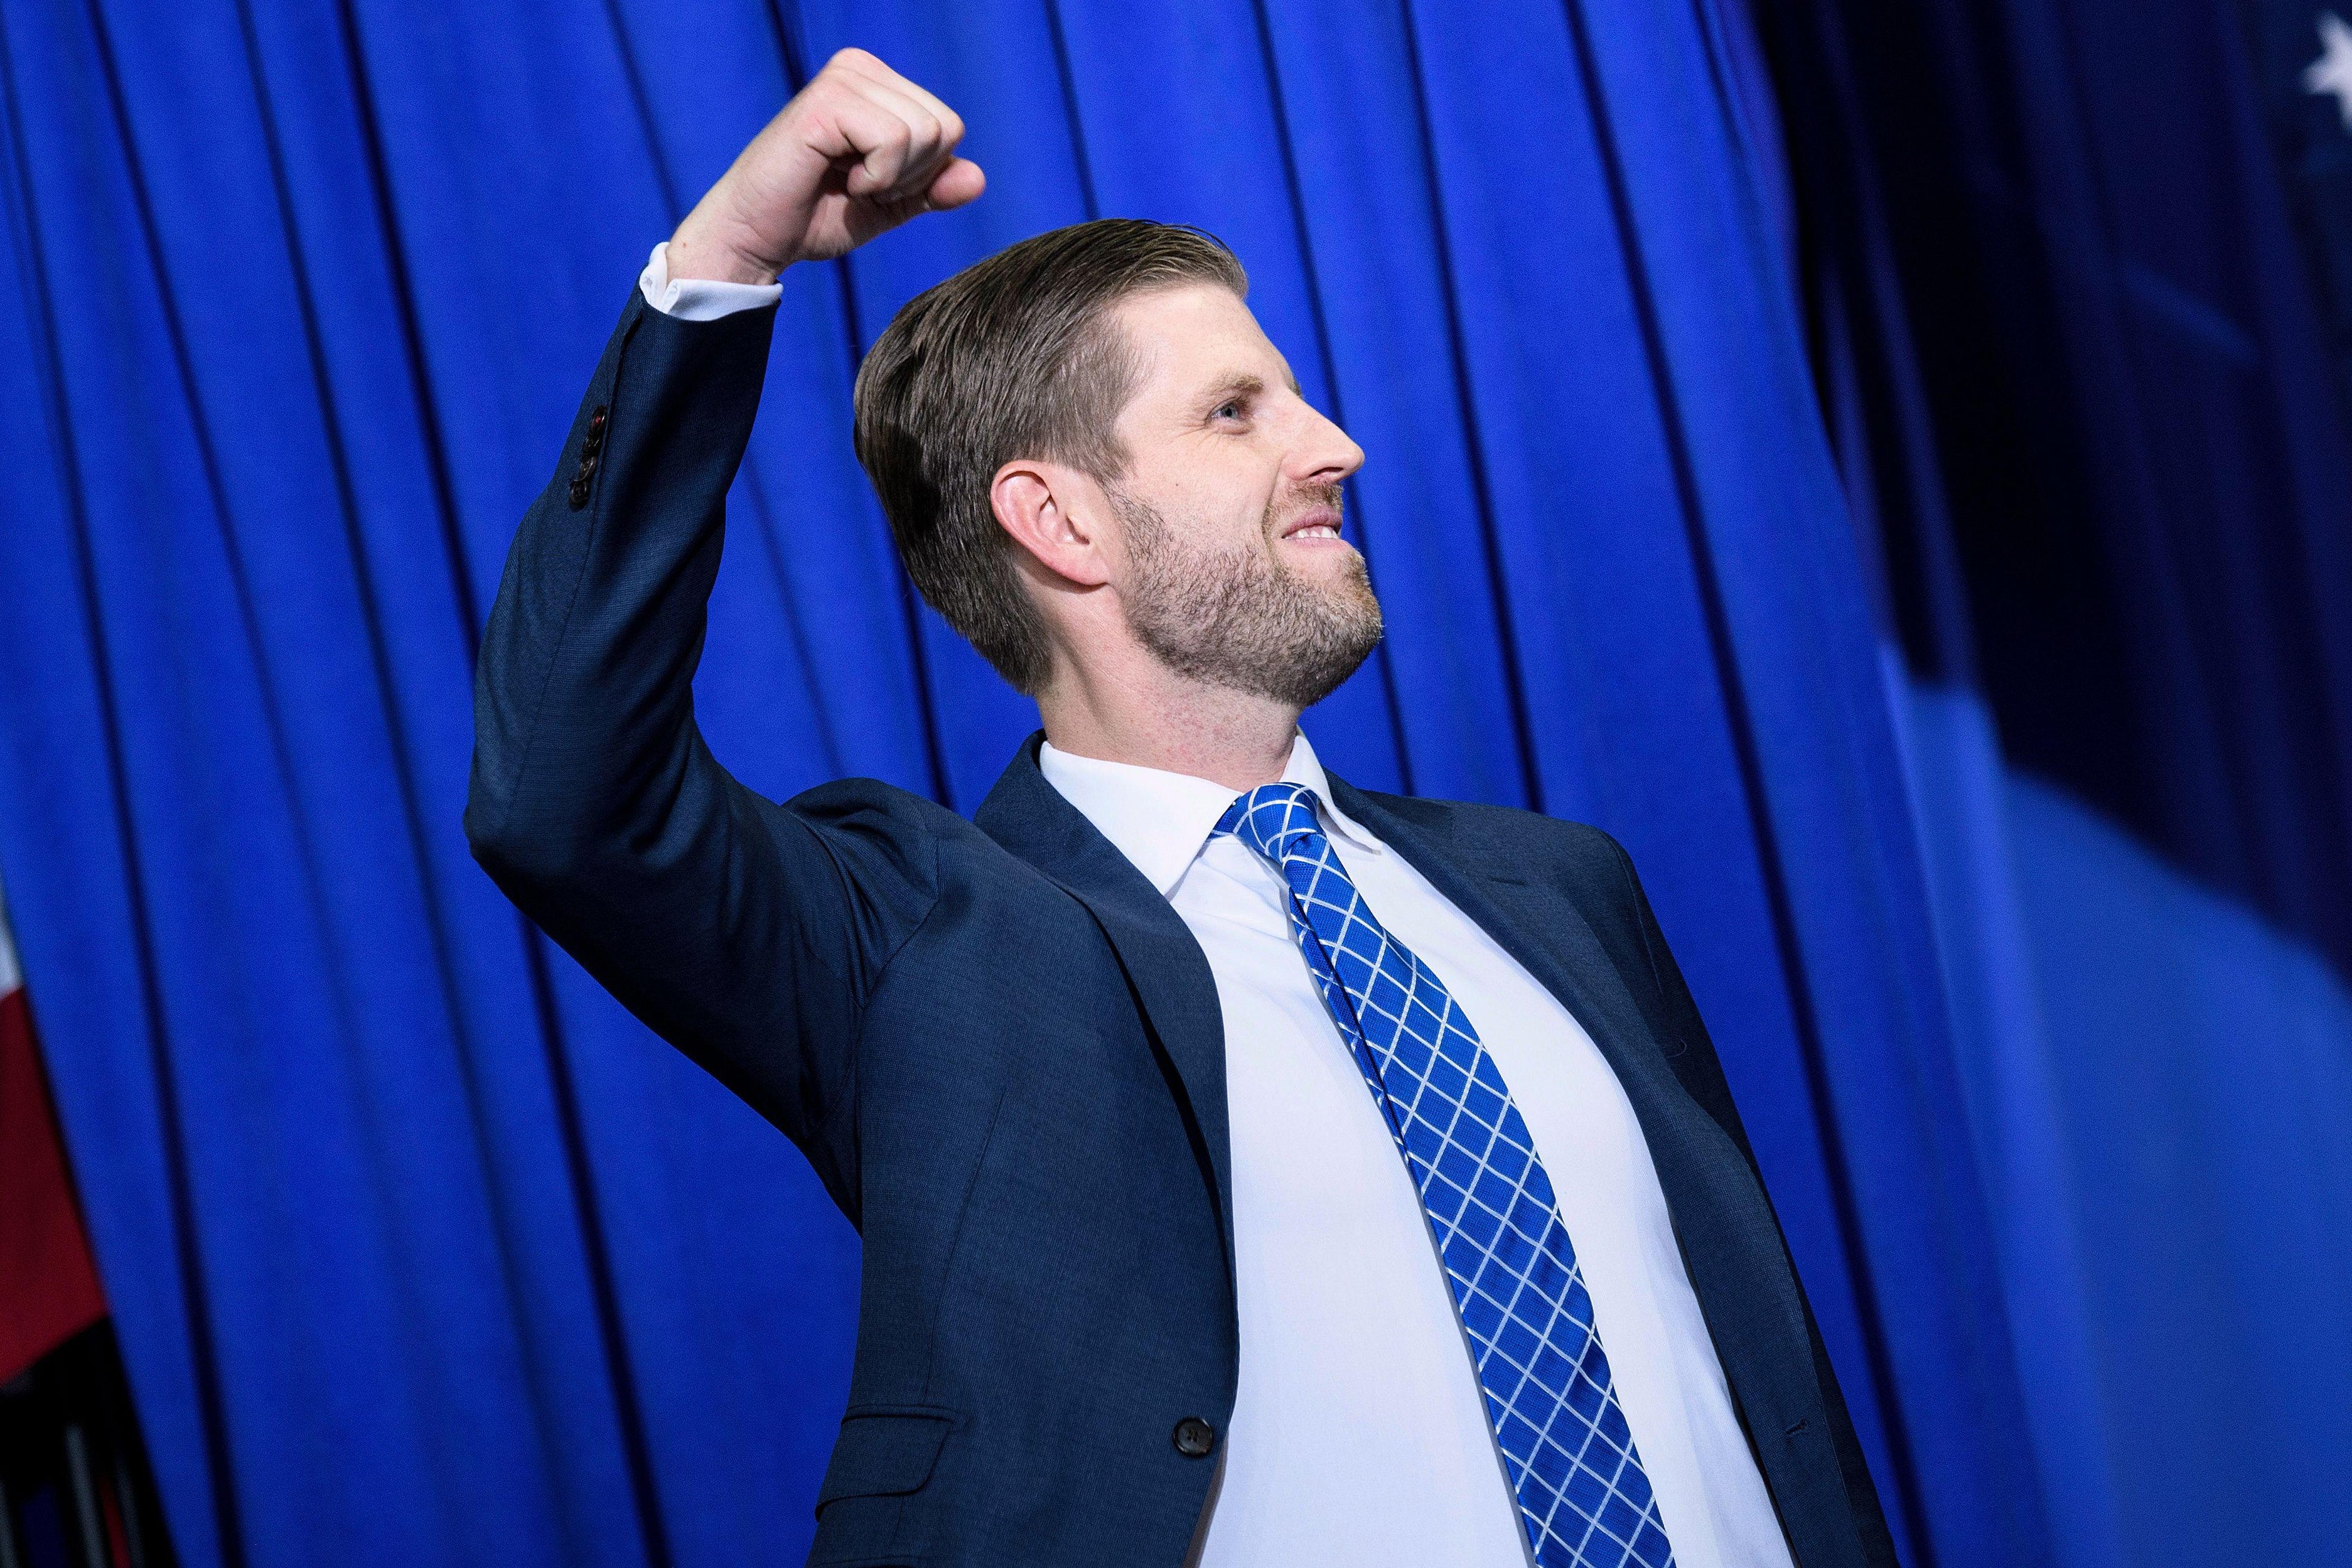 Eric Trump gestures as he arrives for a "Keep America Great" rally at the Target Center in Minneapolis, Minnesota on October 10, 2019.